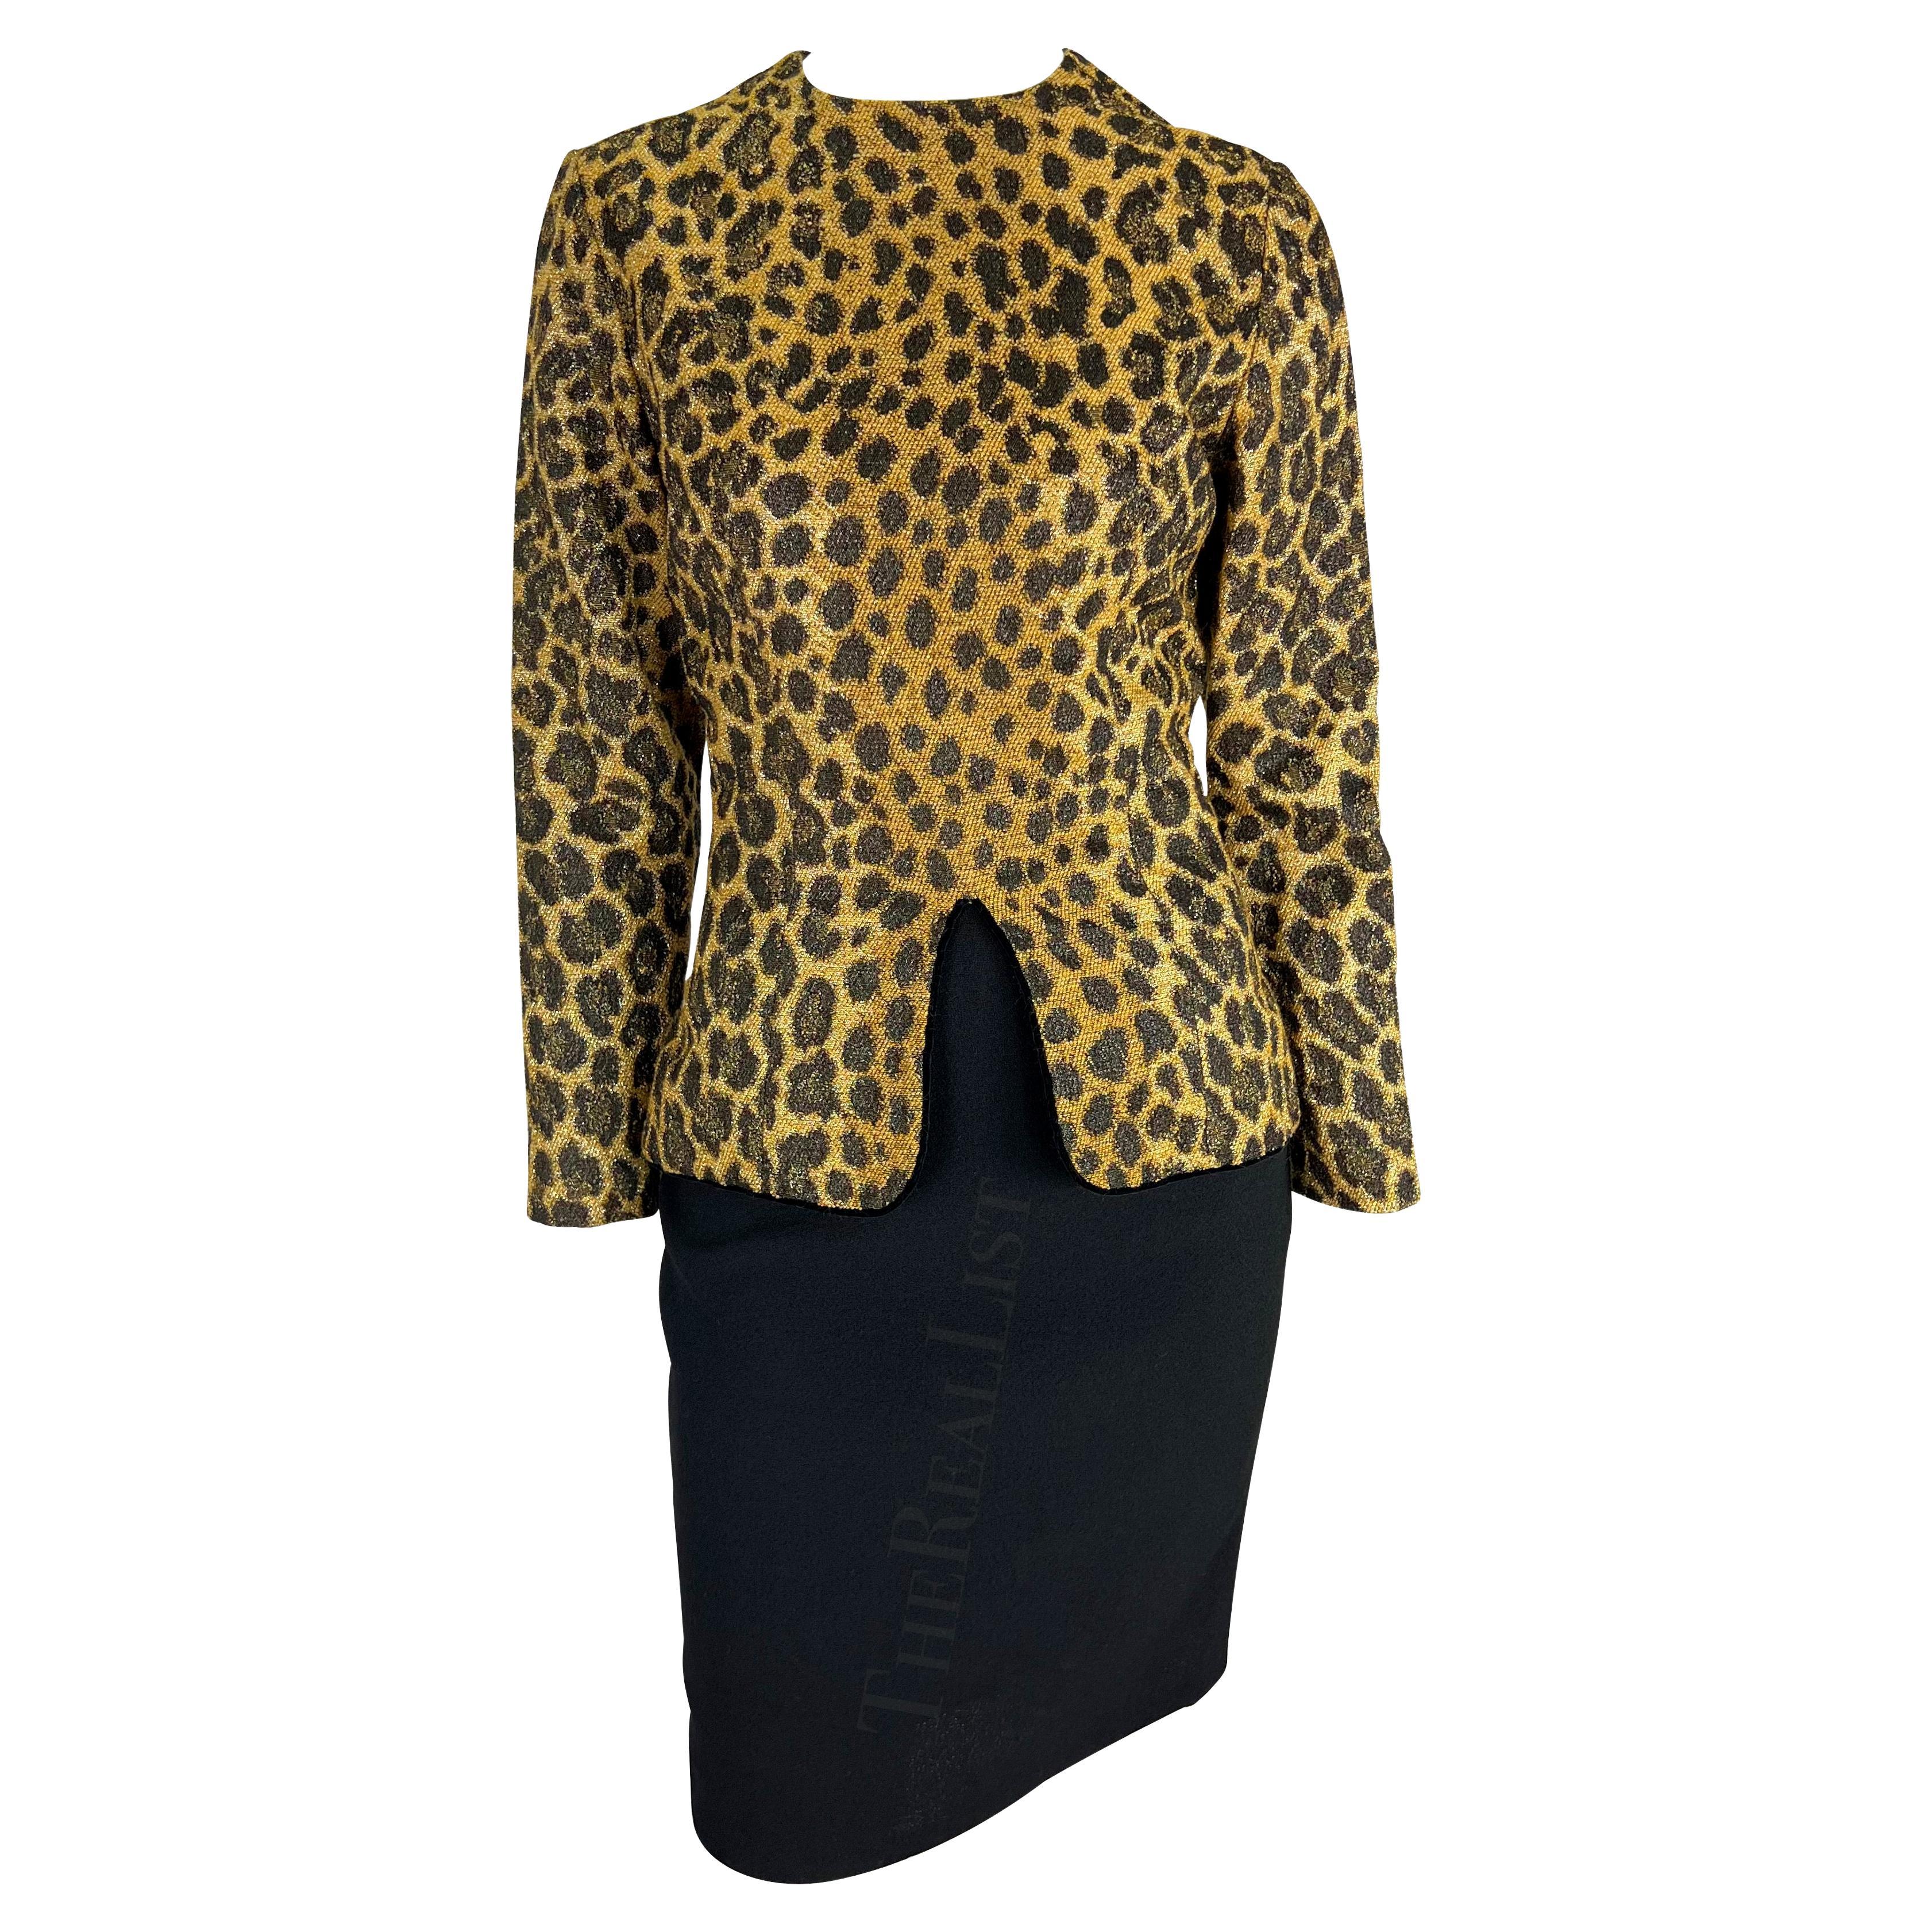 Women's Early 1990s Christian Dior by Gianfranco Ferre Cheetah Print Embroidered Dress For Sale